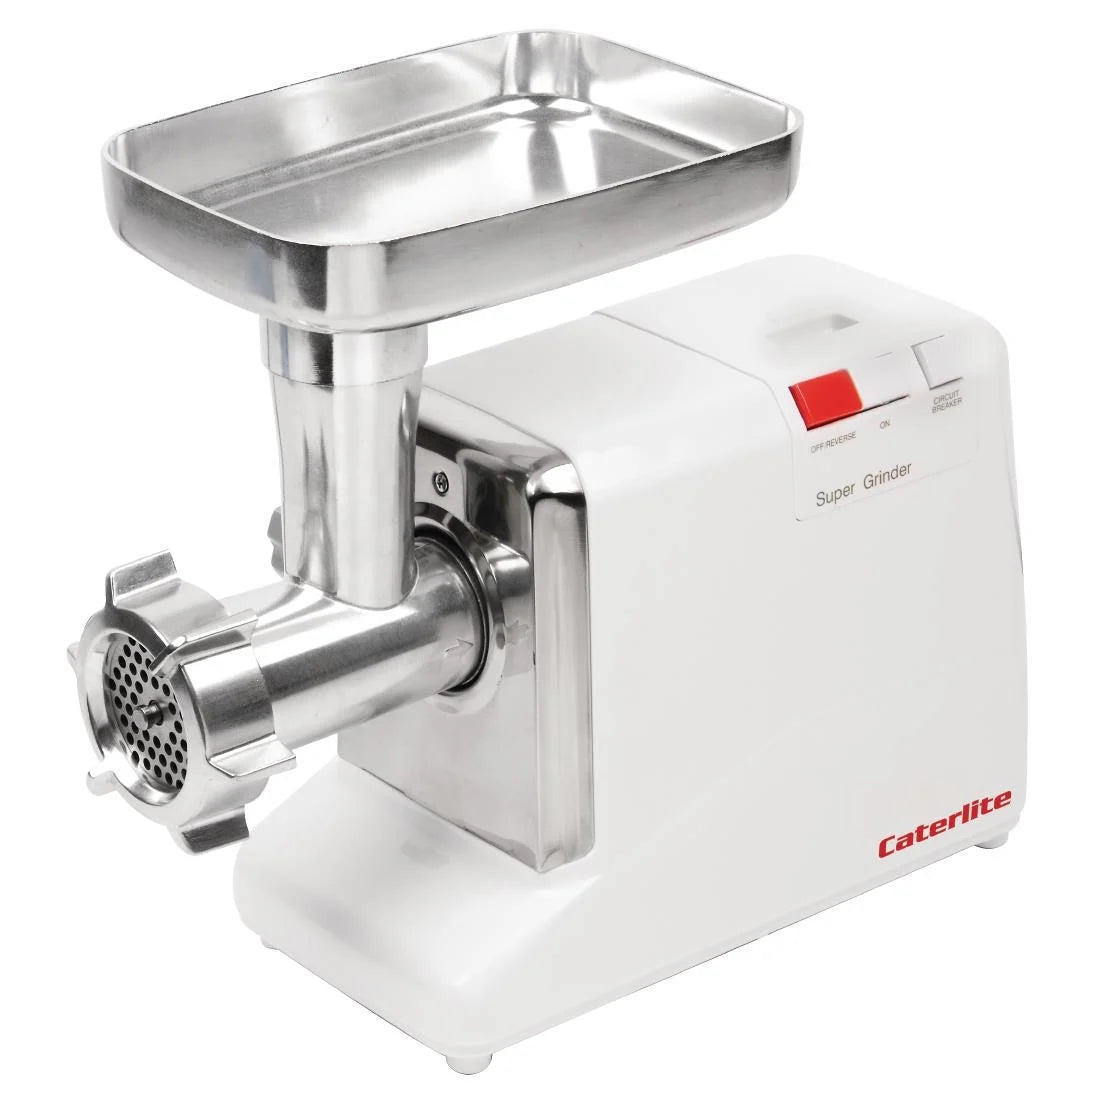 Caterlite Meat Mincer Output:1.9kg/min. Light duty.Product Ref:00848.Model:CB943 -🚚 1-3 Days Delivery